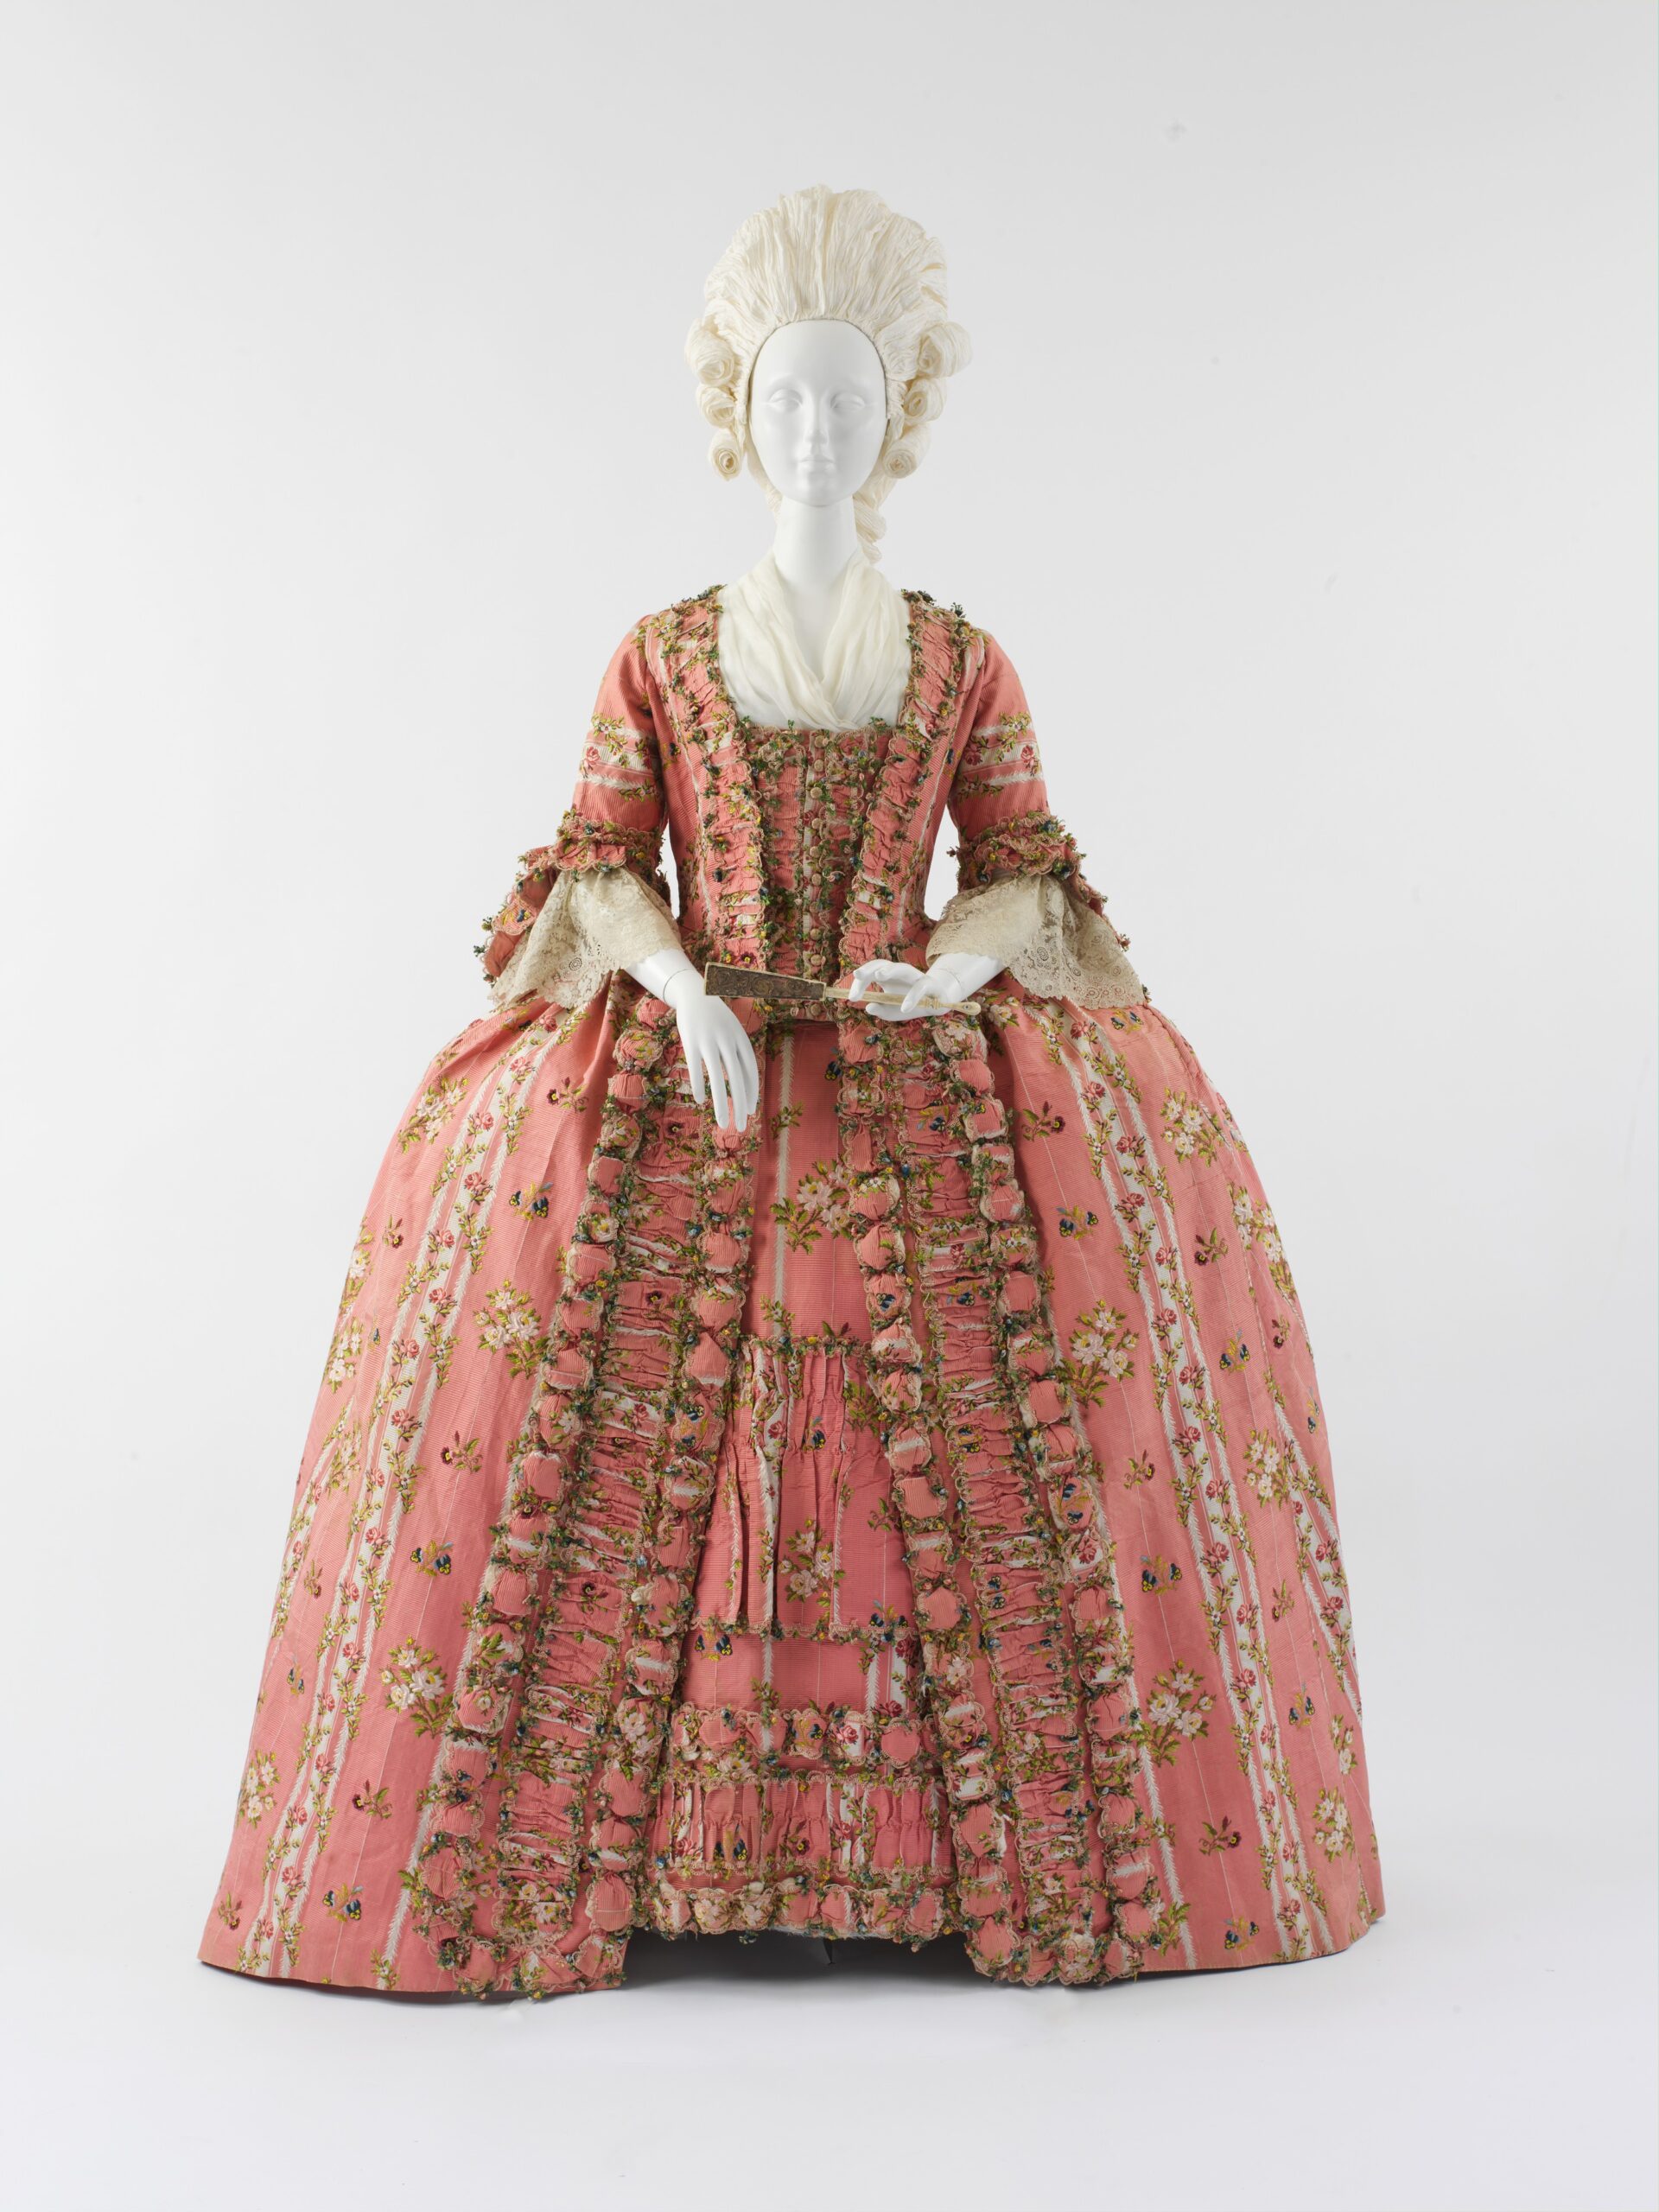 The Costume Institute 18th-century French gown